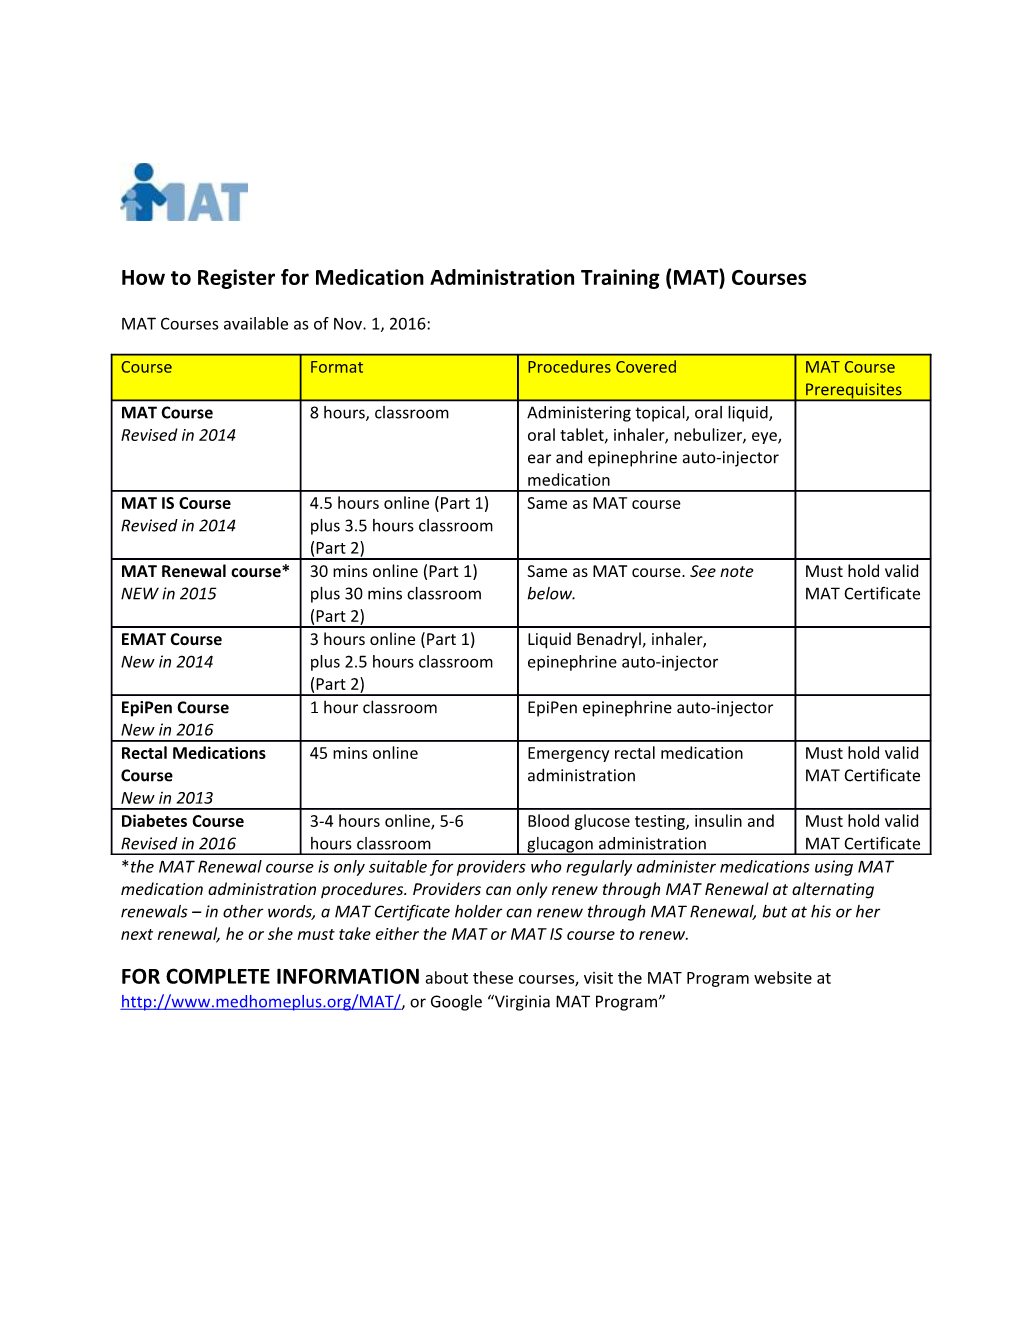 How to Register for Medication Administration Training (MAT) Courses